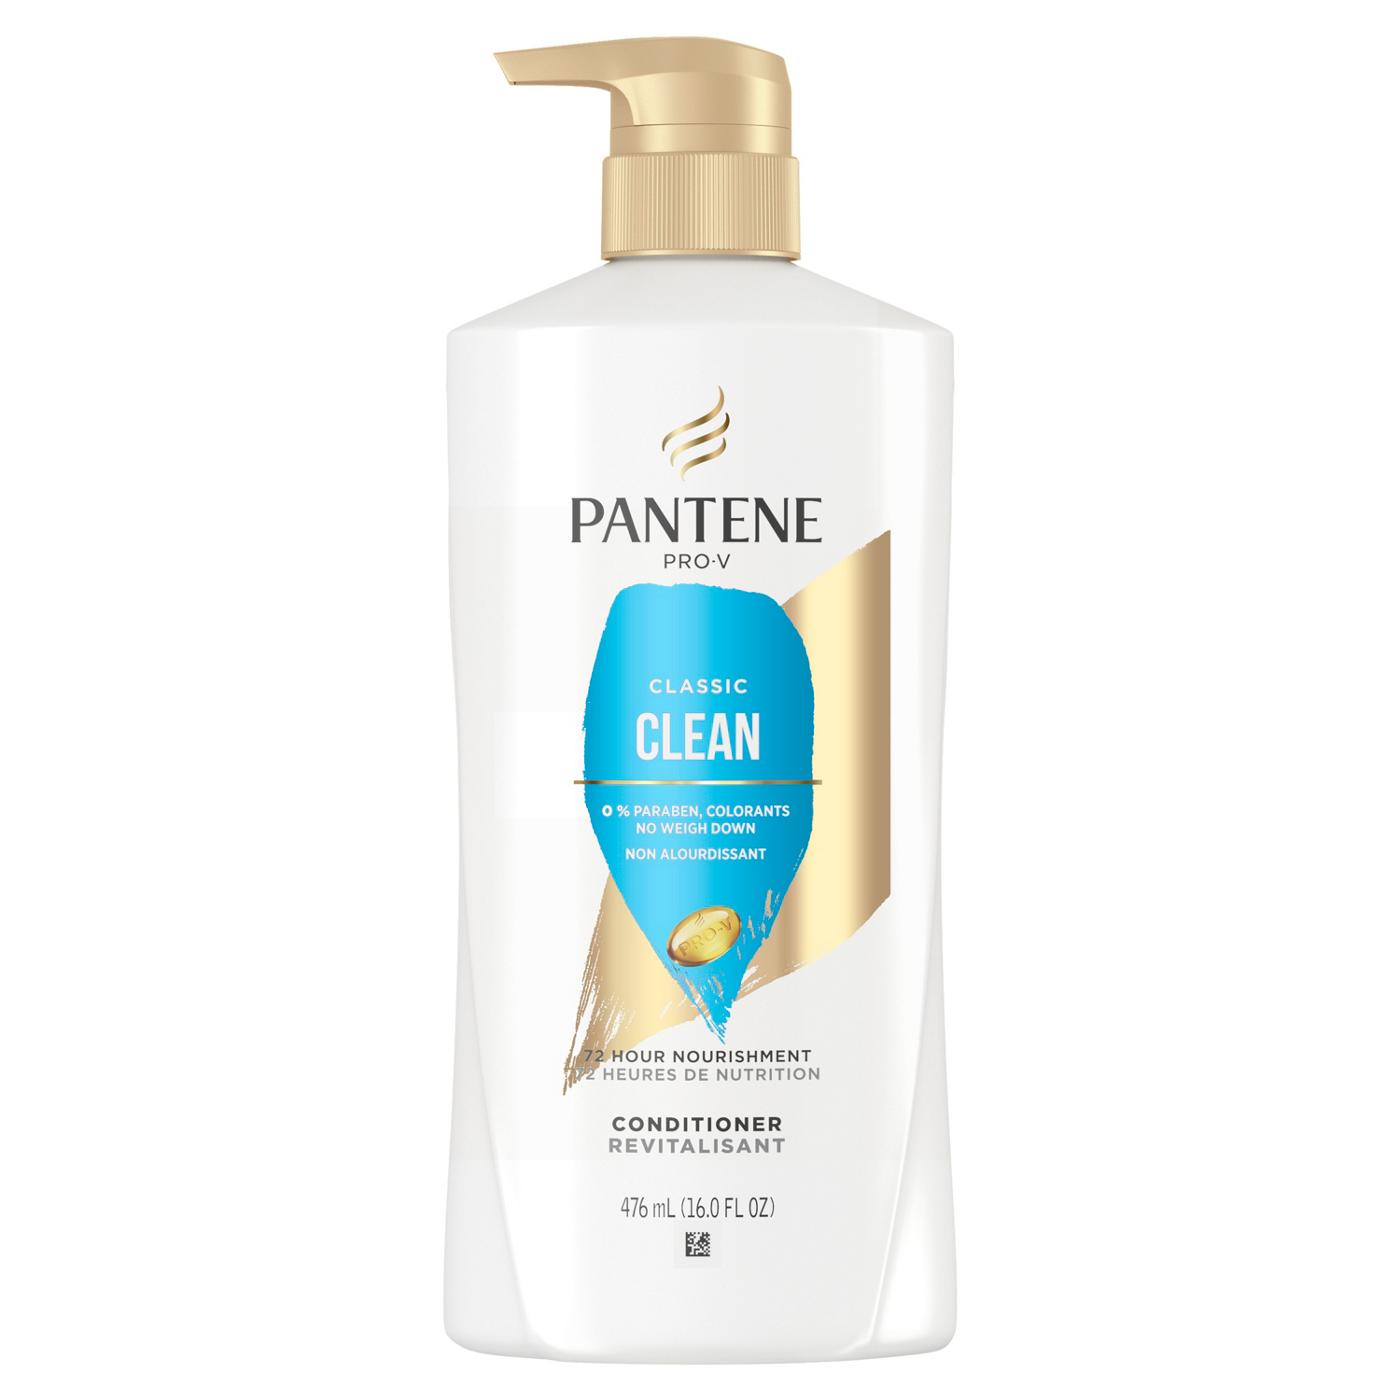 Pantene PRO-V Classic Clean Conditioner; image 1 of 10